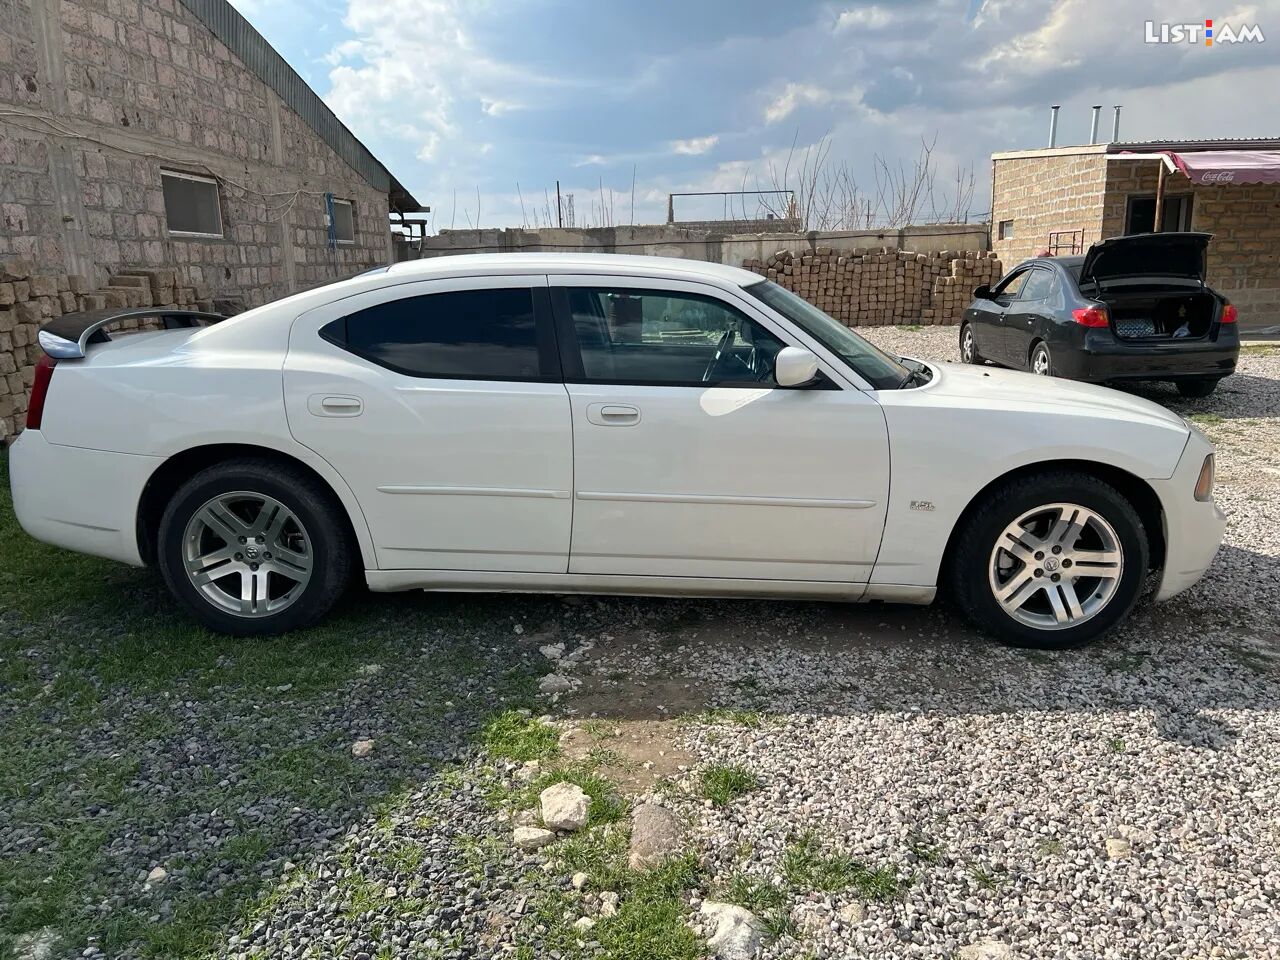 Dodge Charger, 3.5